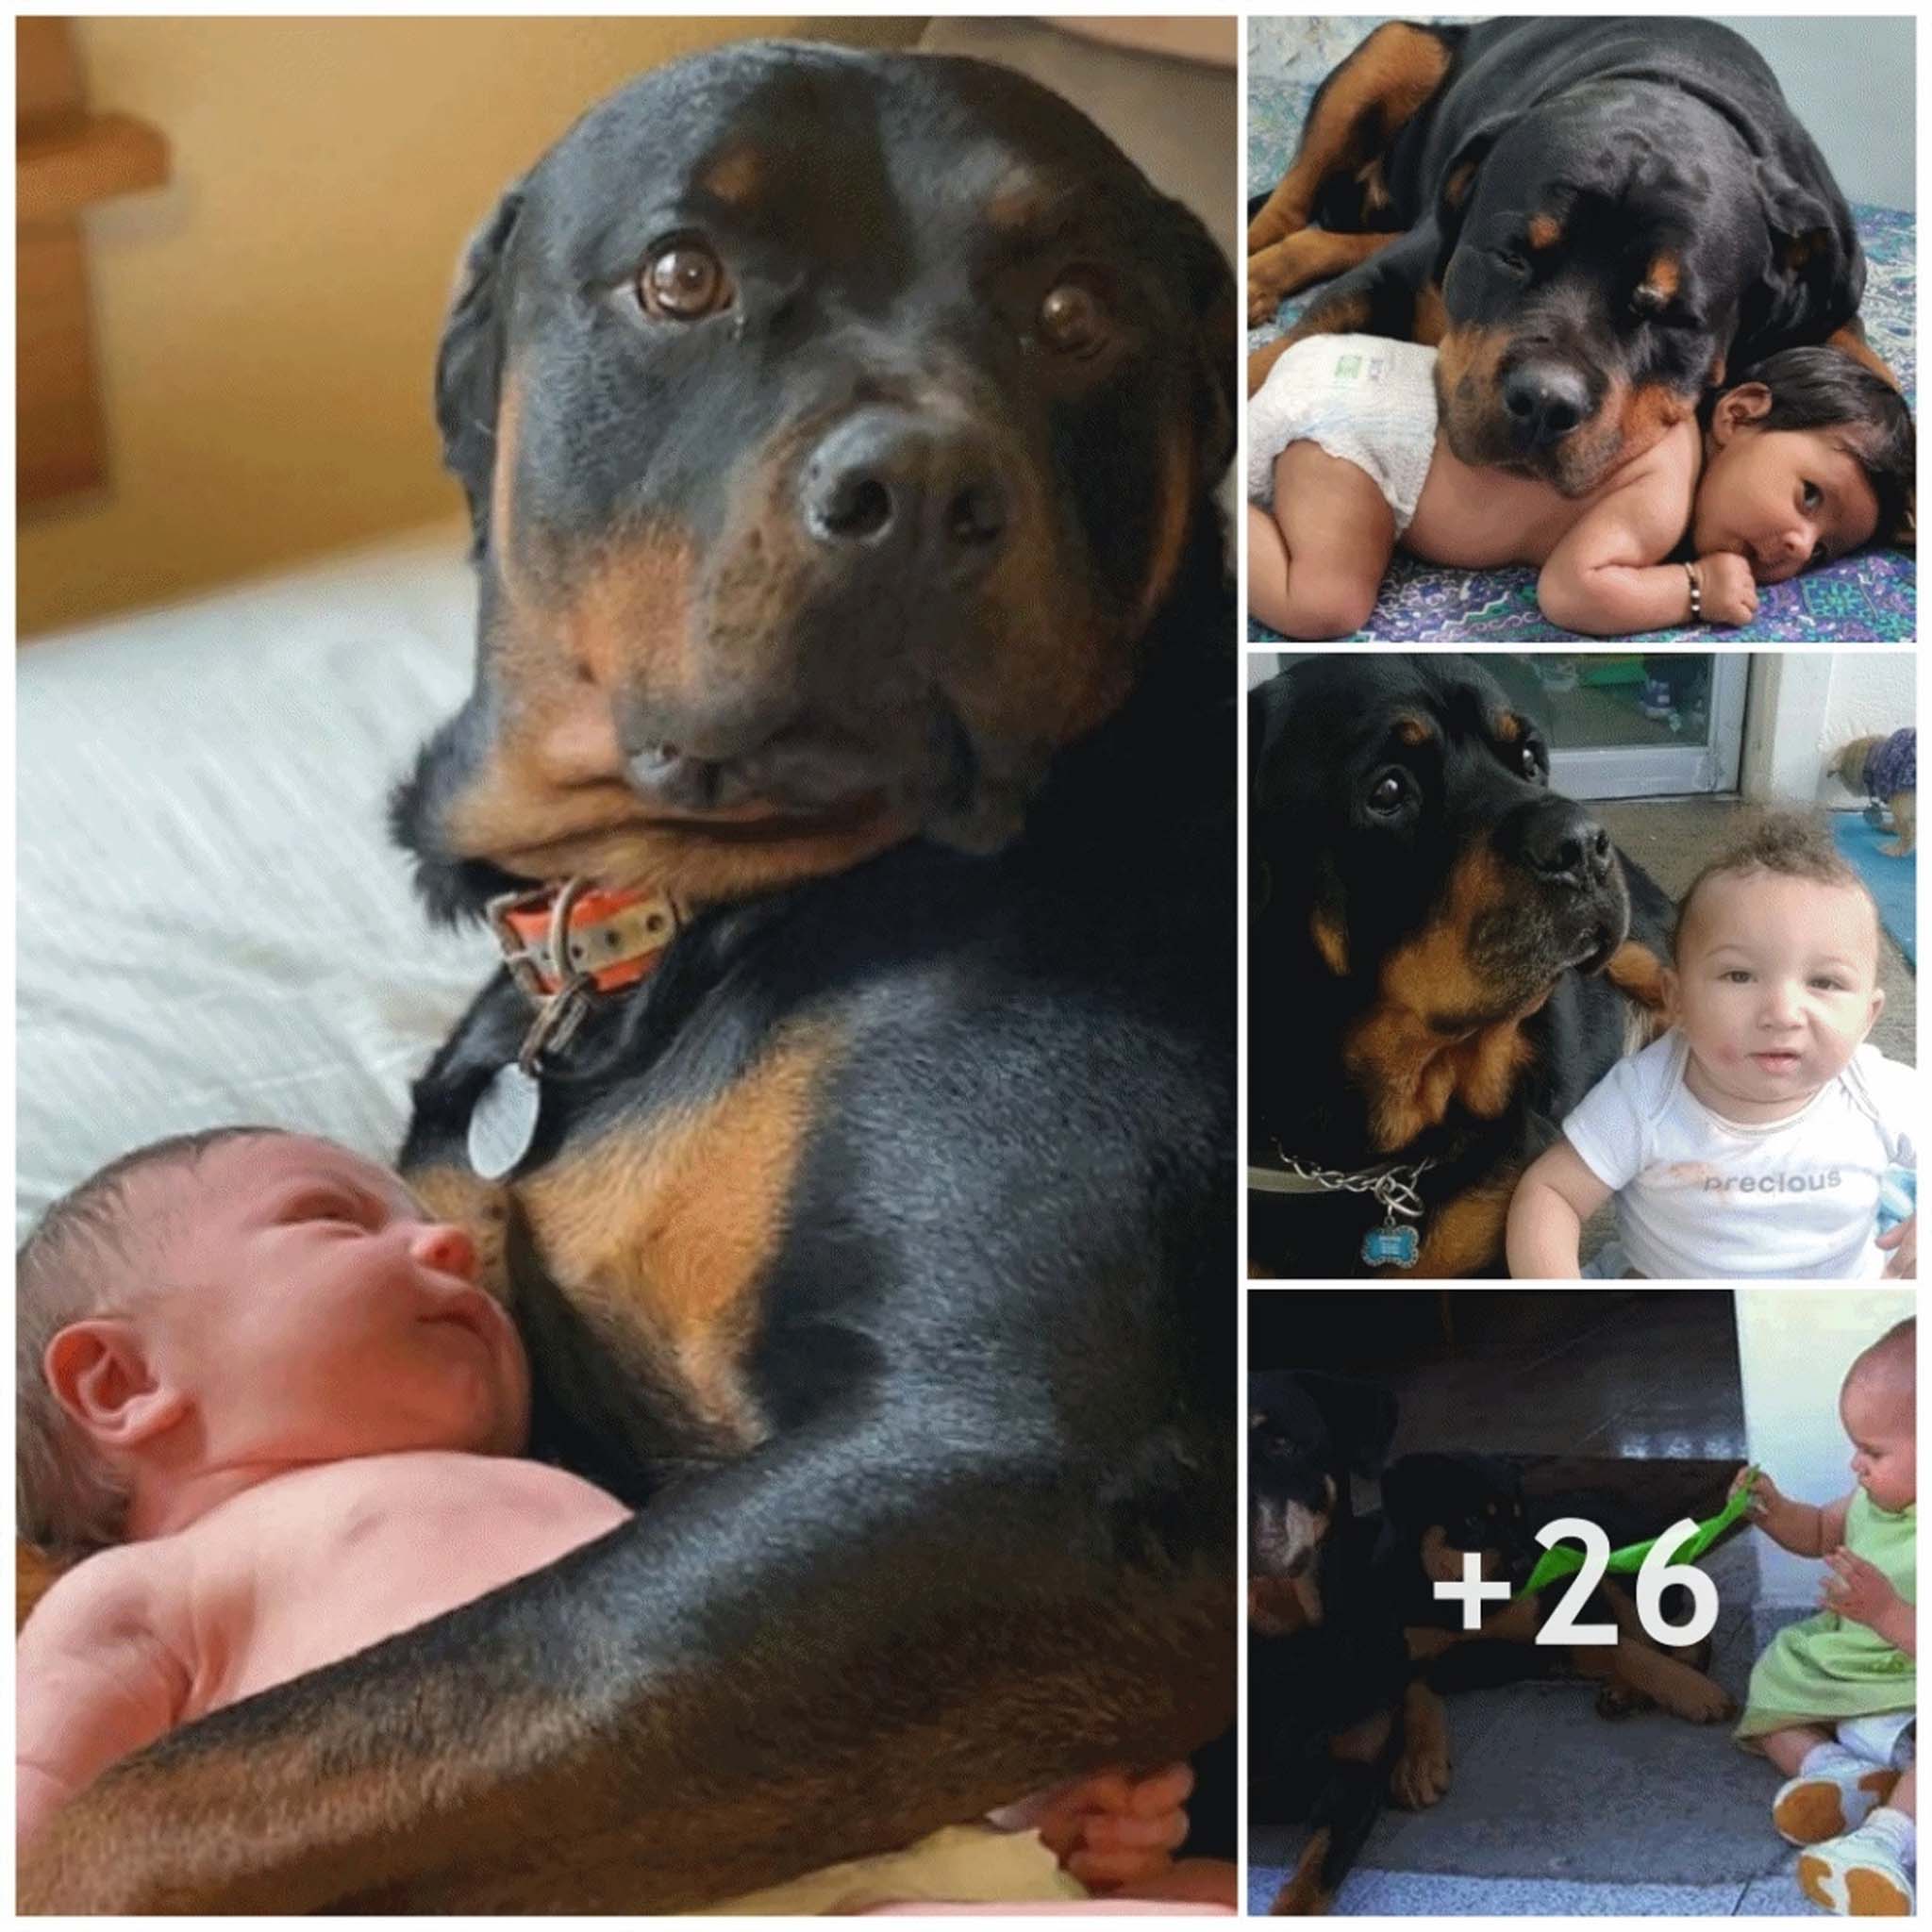 Heartfelt Connection: Frozen Dog Moves Emotionally as Owner Allows Him to Cradle Newborn Baby on His Lap, Tears Glistening